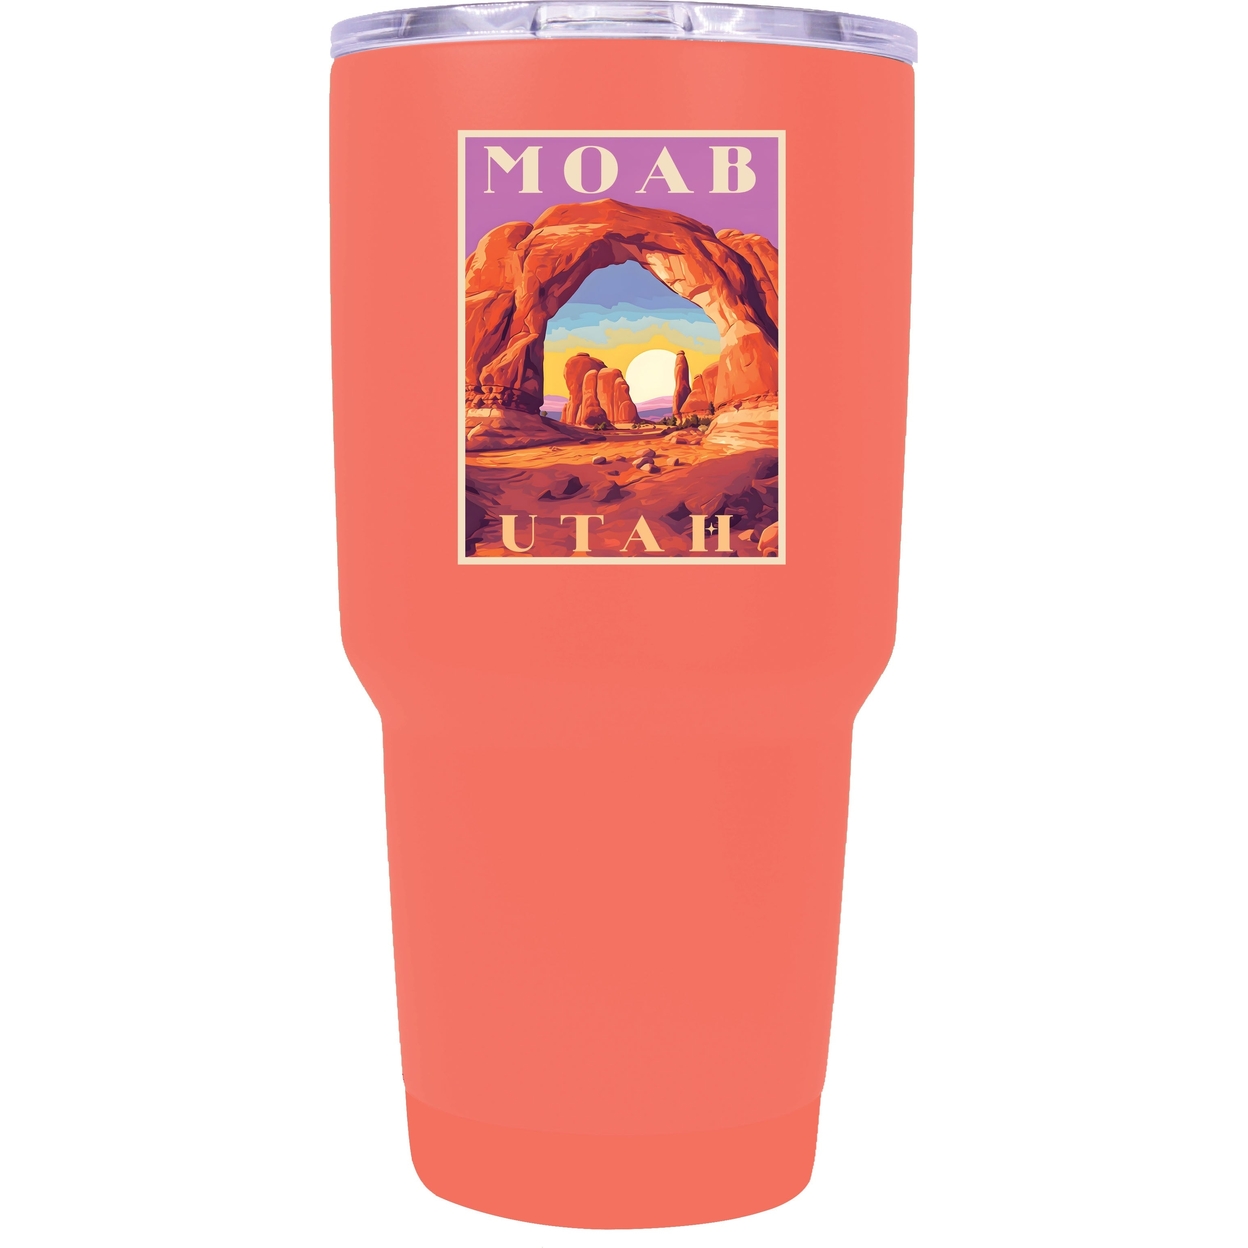 Moab Utah Souvenir 24 Oz Insulated Stainless Steel Tumbler - Coral,,4-Pack